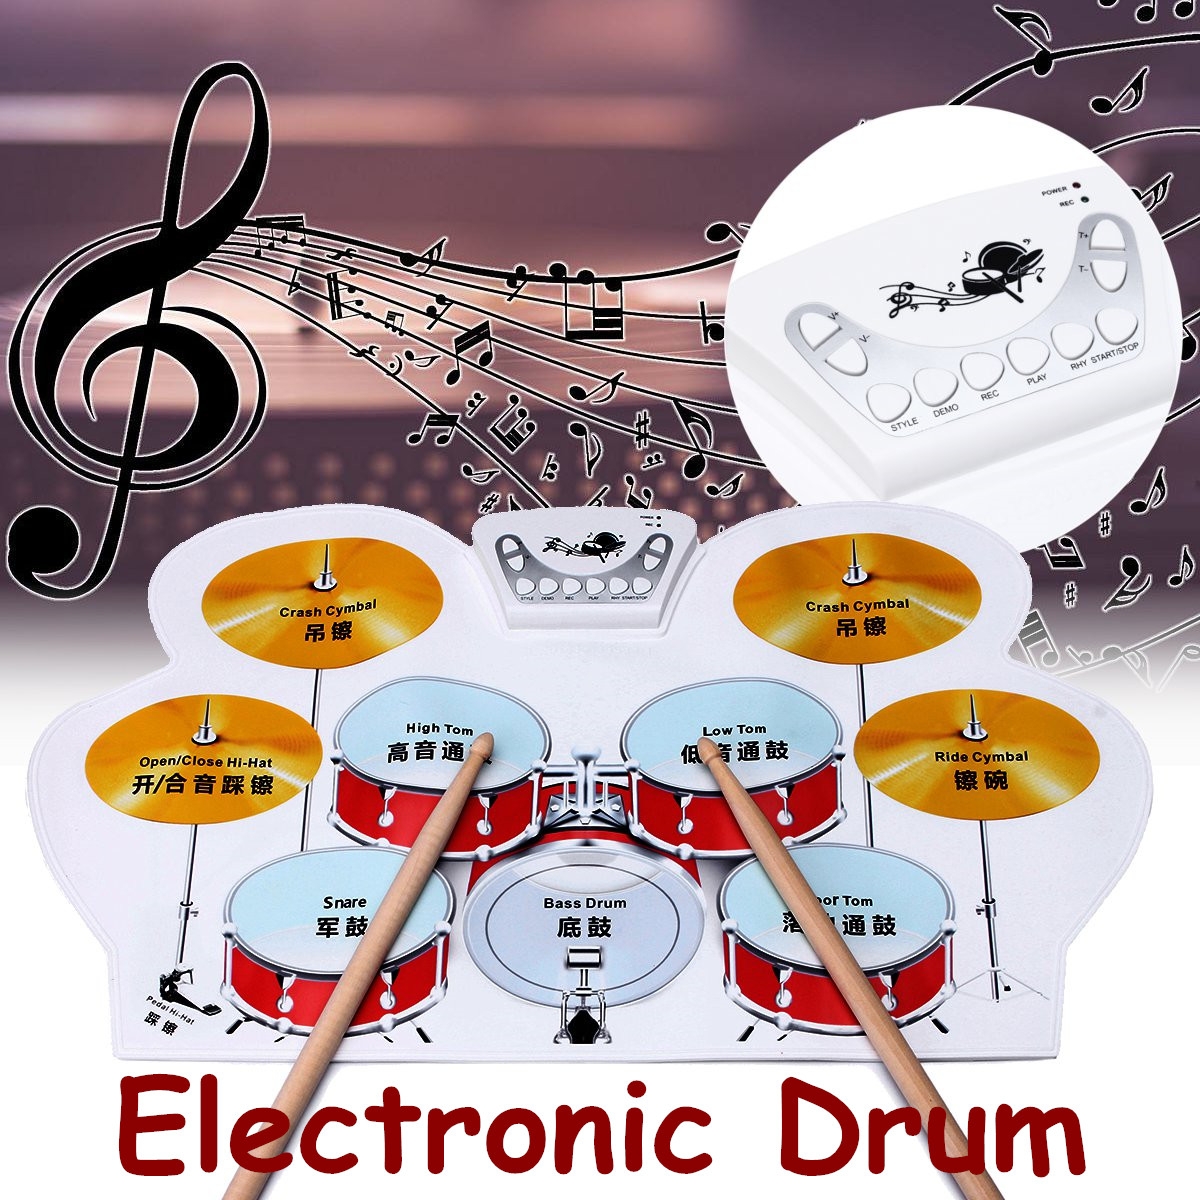 Electronic Drum Speakers Set Rollup Musical Pedals Digital Instruments Kits